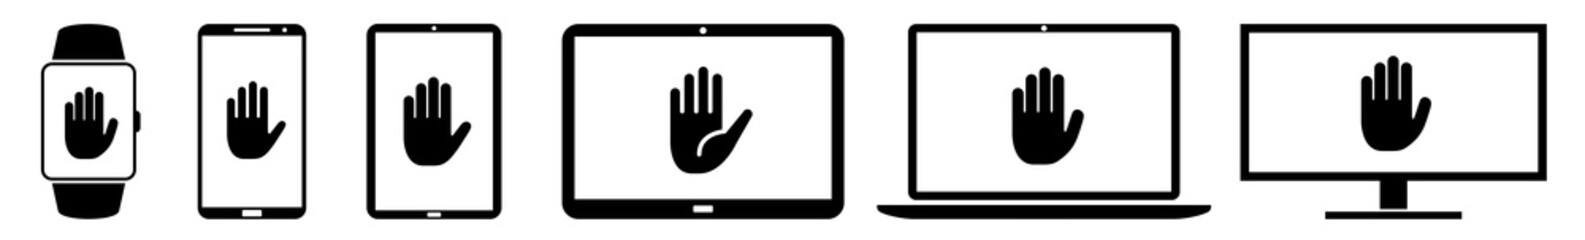 Display stop, access, hand, block, ban, no, not, allowed, forbidden, prohibition Icon Devices Set | Web Screen Device Online | Laptop Vector Illustration | Mobile Phone | PC Computer Sign Isolated